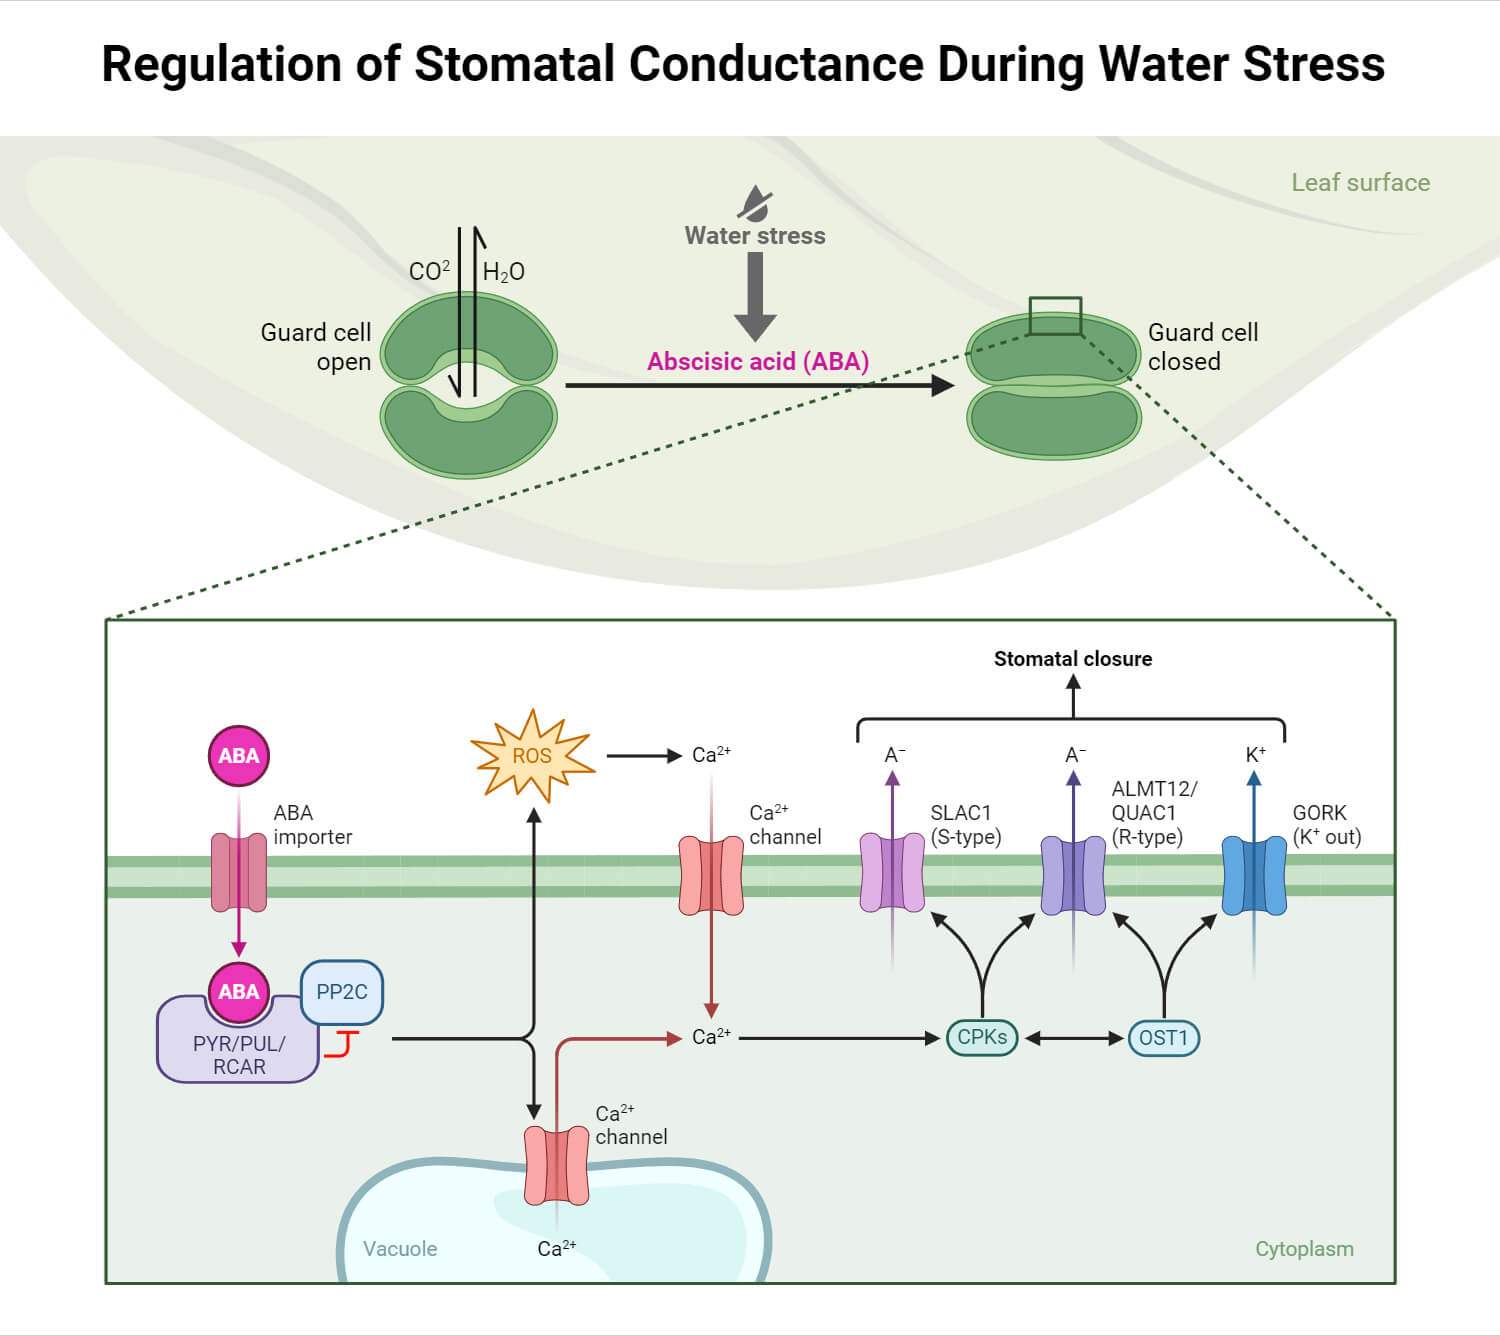 Regulation of Stomatal Conductance During Water Stress